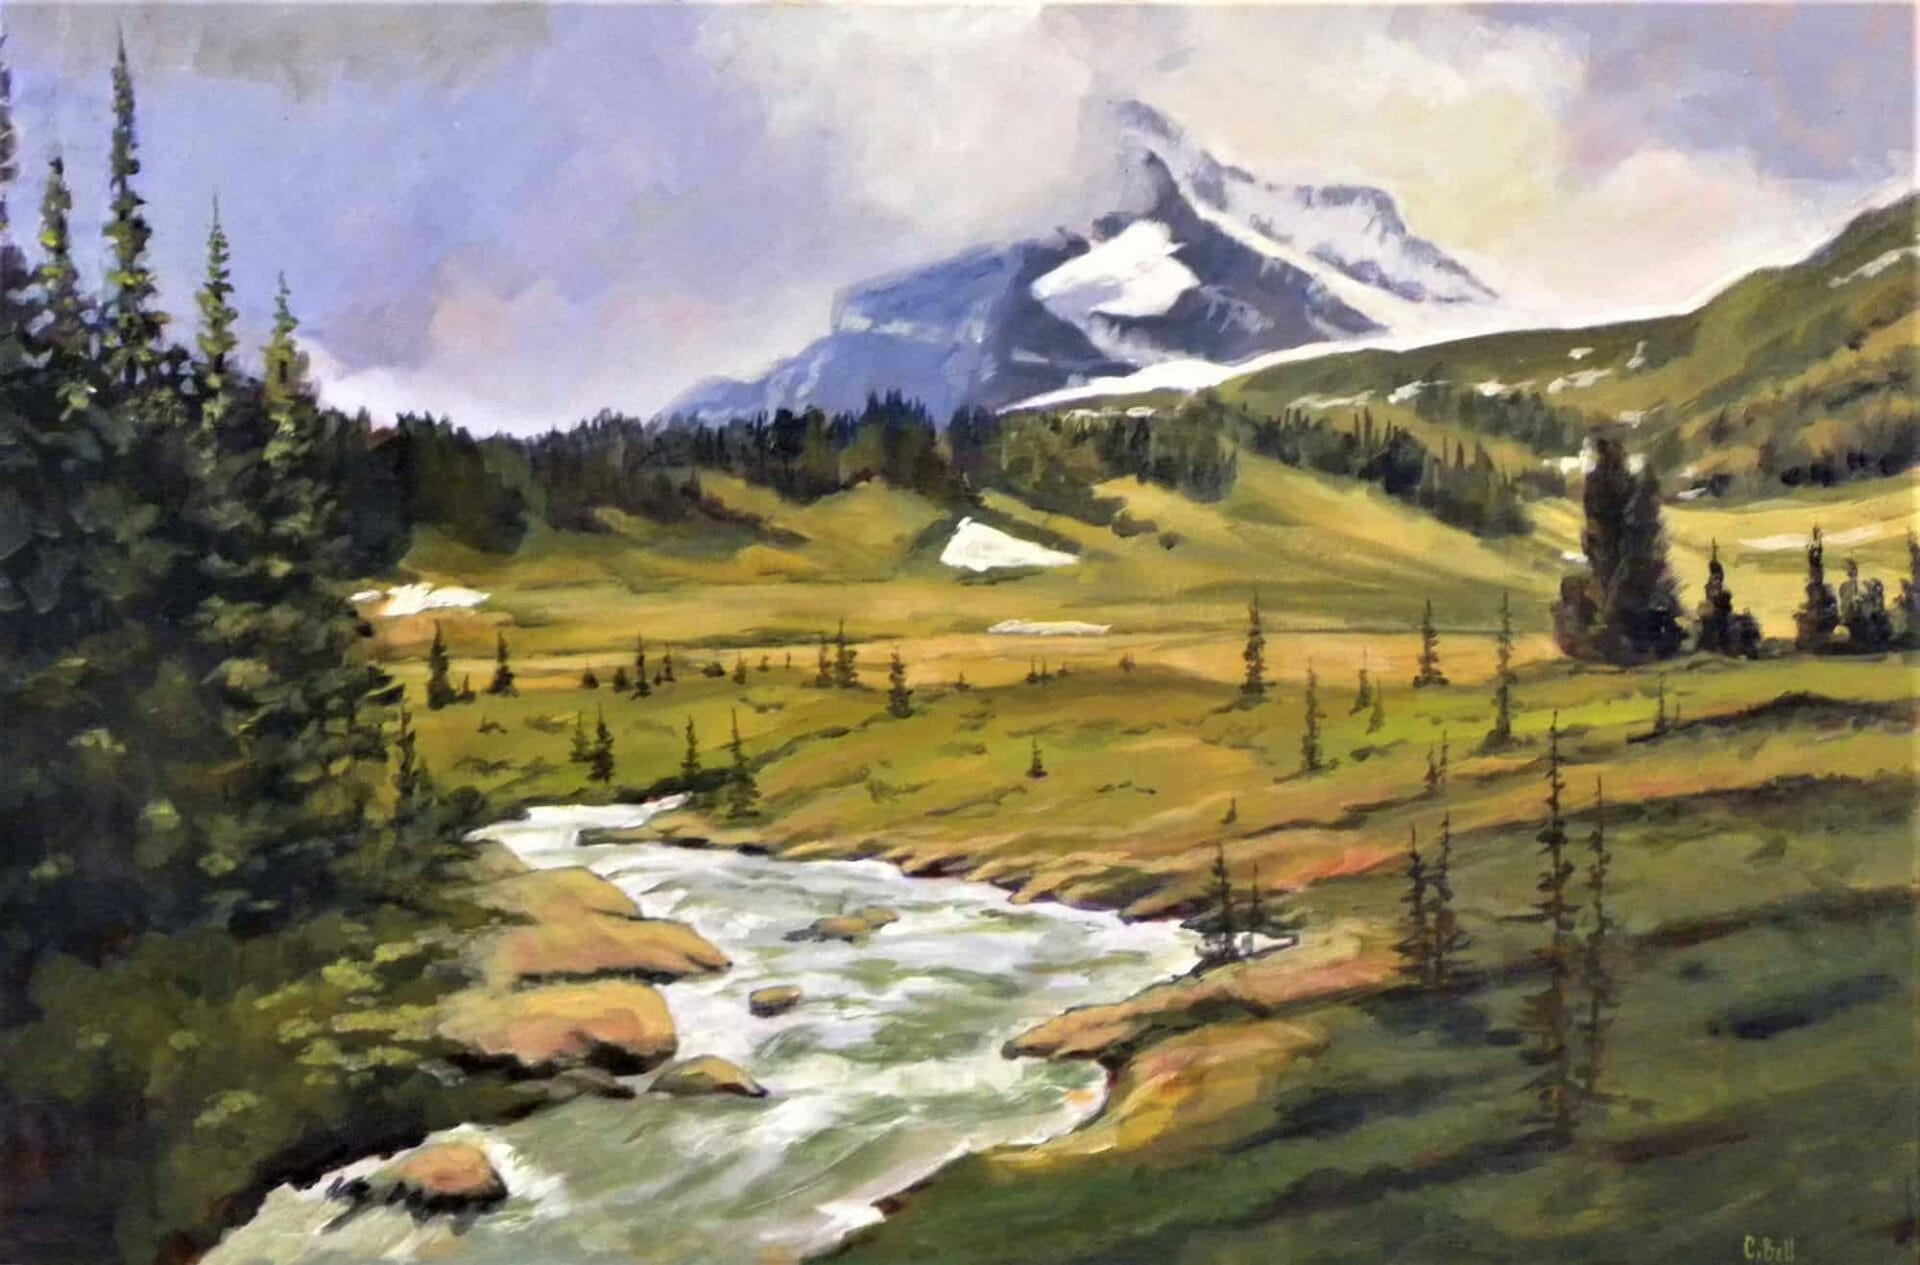 Healy Meadows 3 - Canadian Original Artwork For Sale by Colin Bell - Calgary, AB Local Artist - Mountains